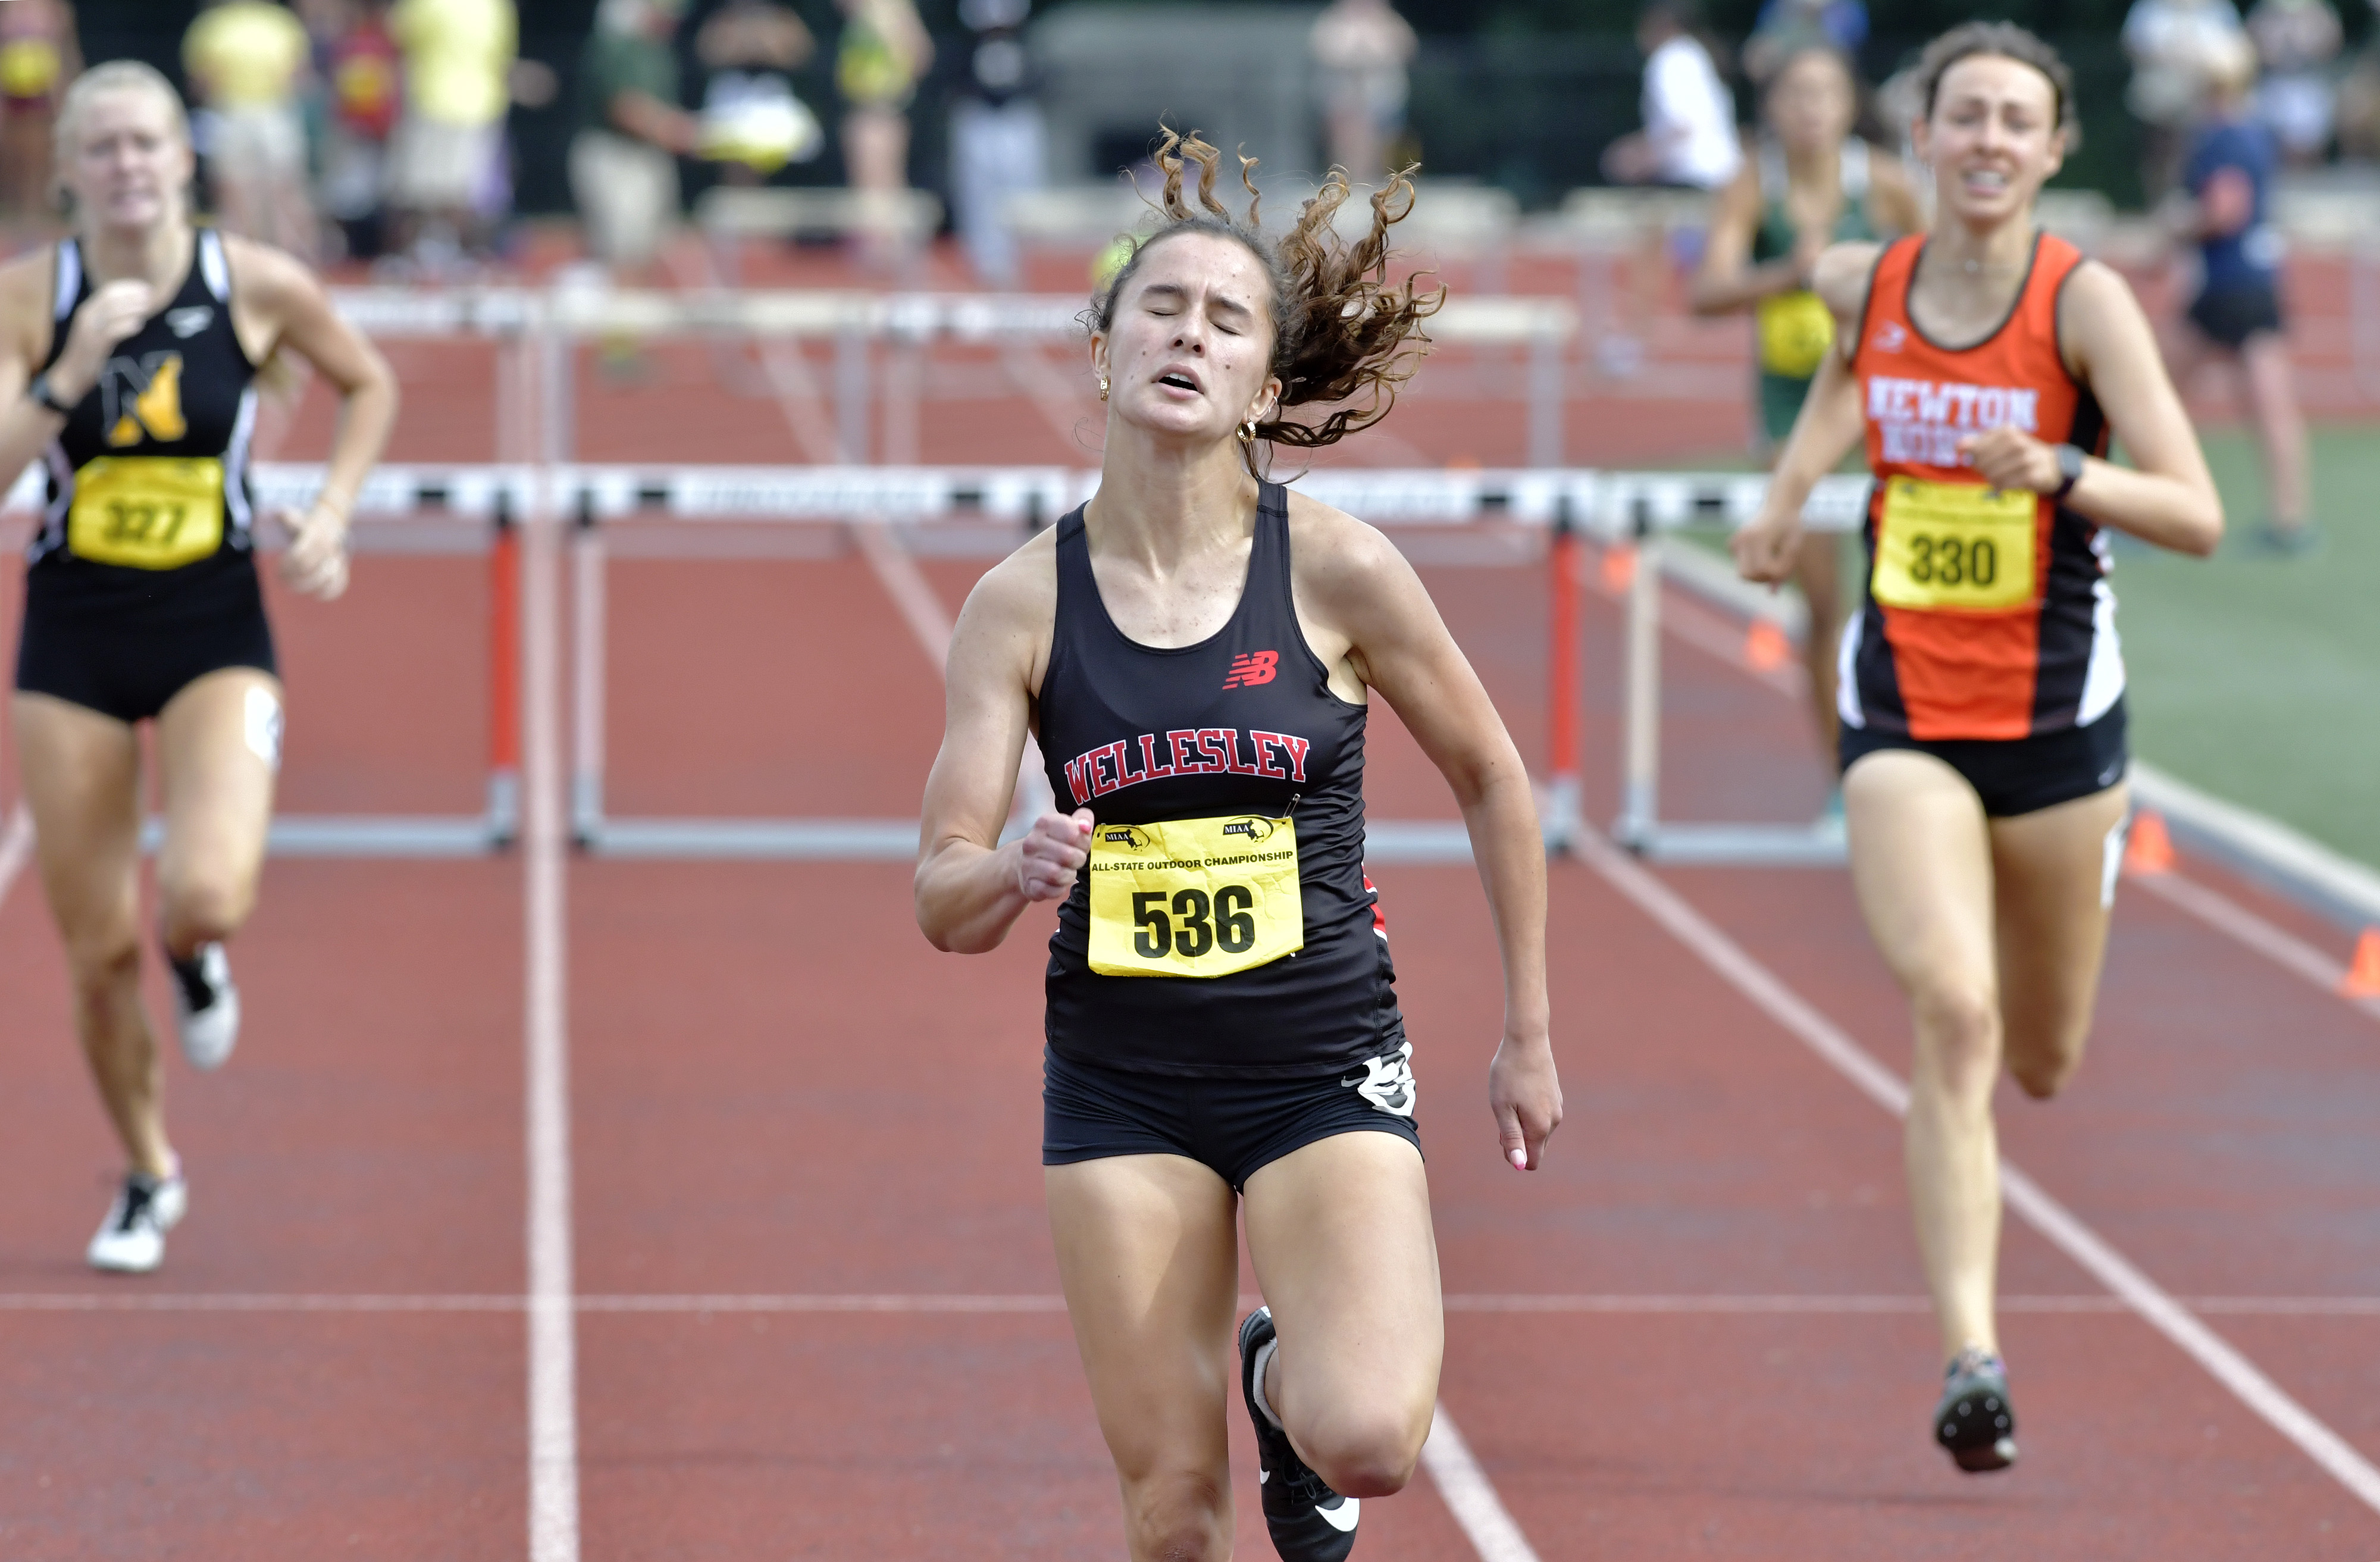 Megan Webb of Wellesley won the 400 meter hurdles by more than a second.